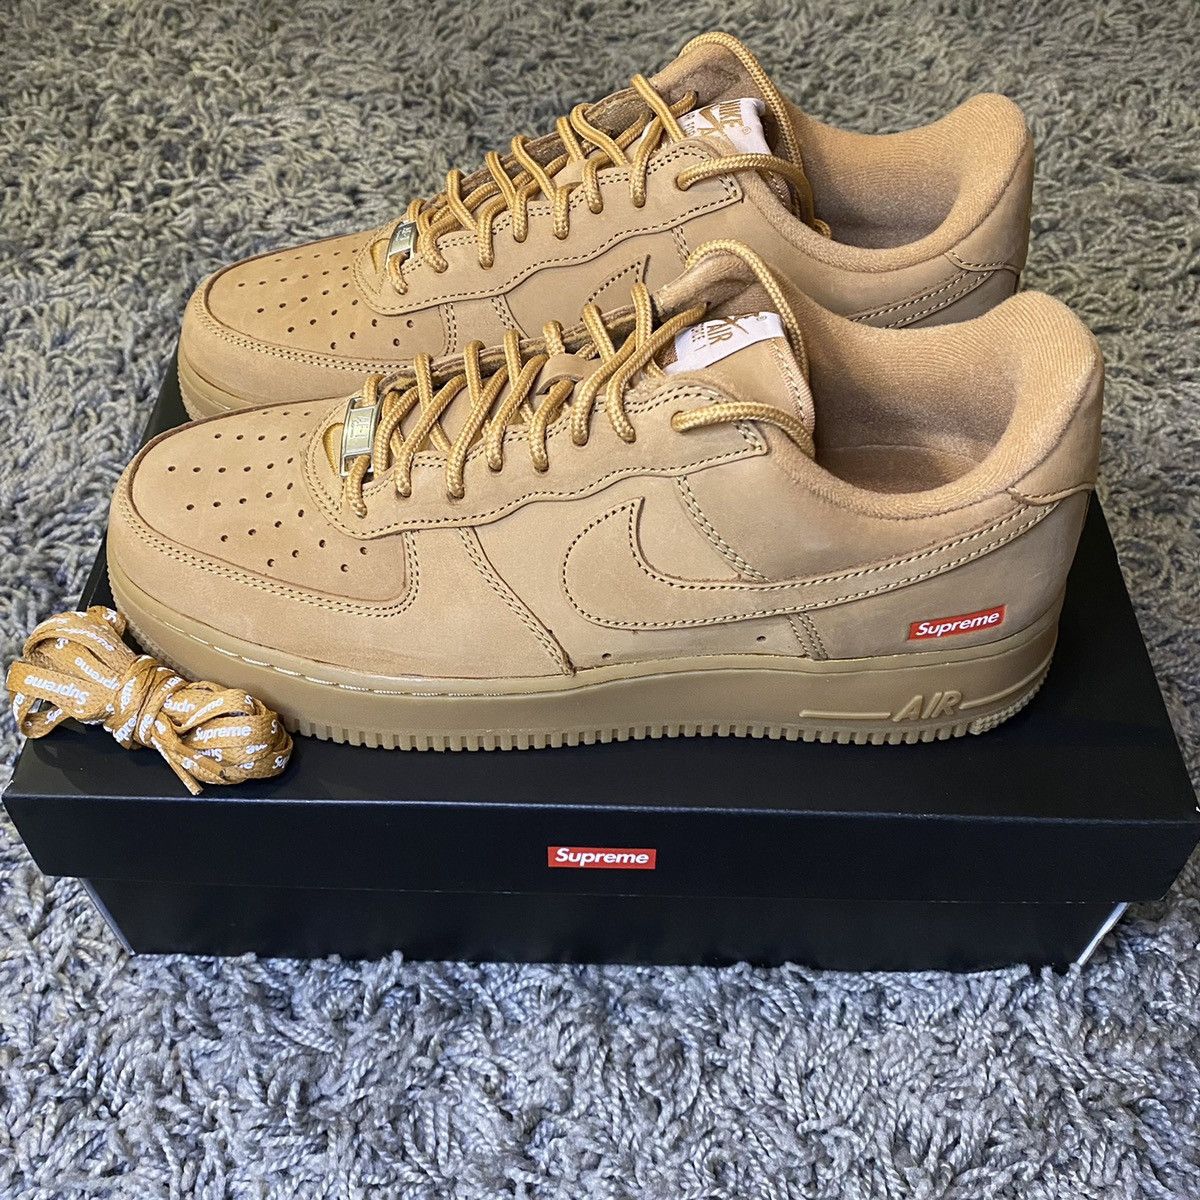 Supreme Supreme Nike Air Force 1 Low Flax Size 9 DN1555-200 | Grailed